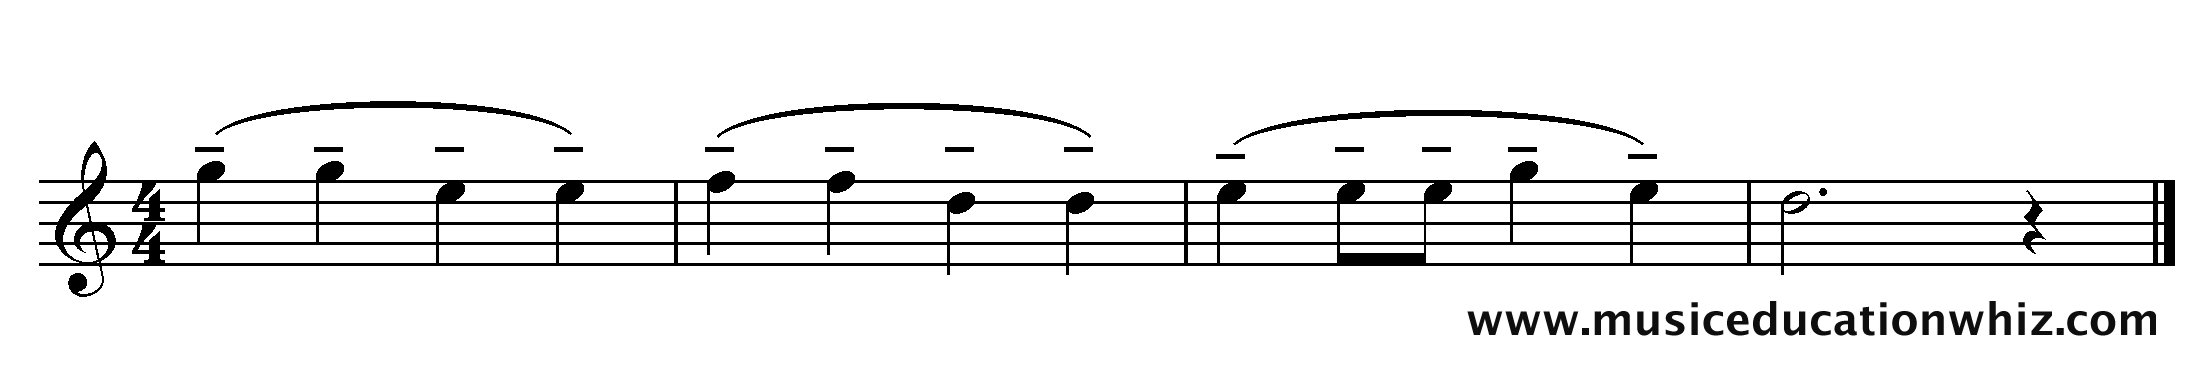 The music for 'Mary Mary Quite Contrary' with mezzo staccato markings (dashes).